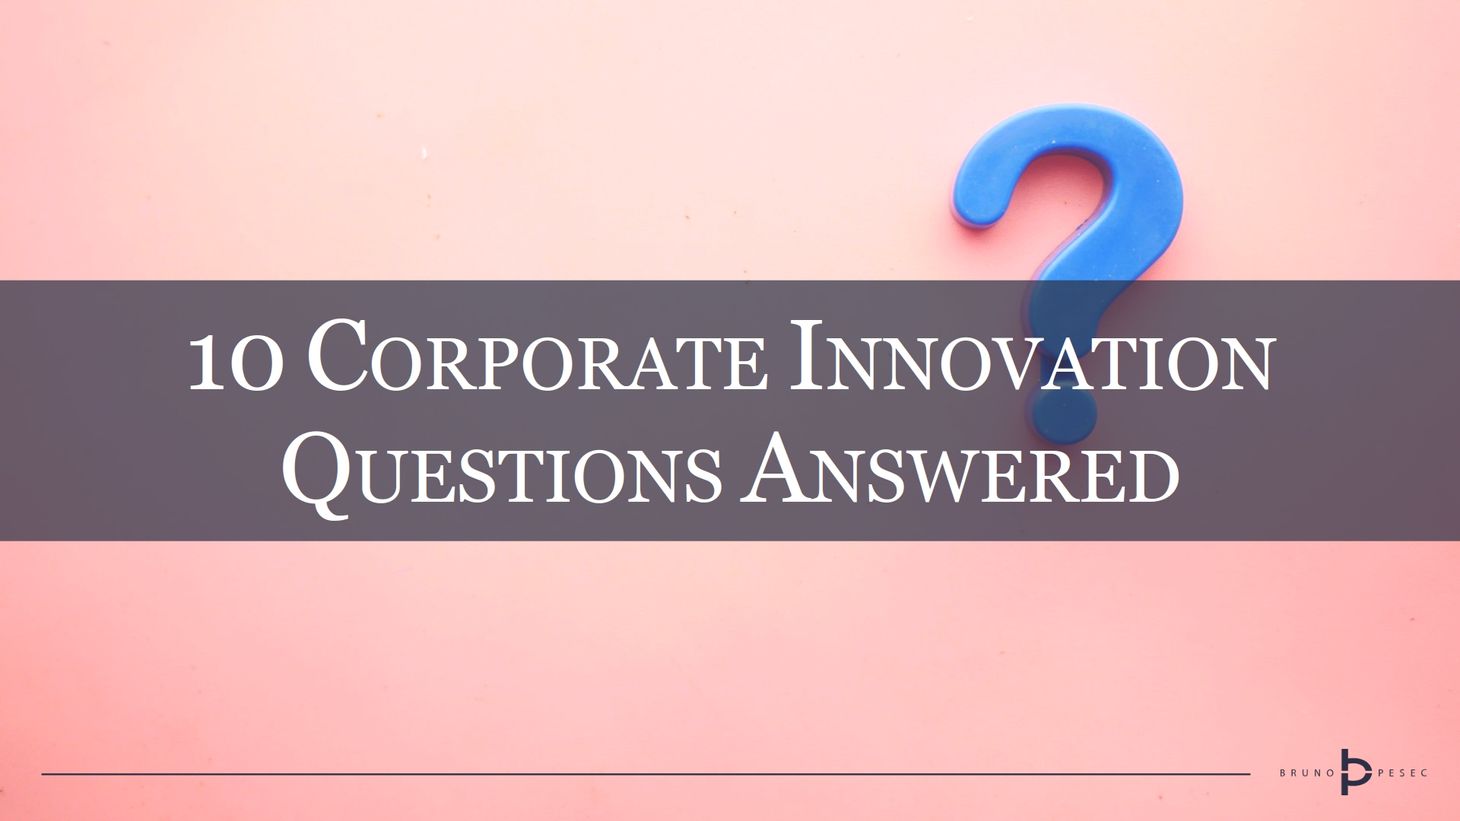 Ten more corporate innovation questions answered